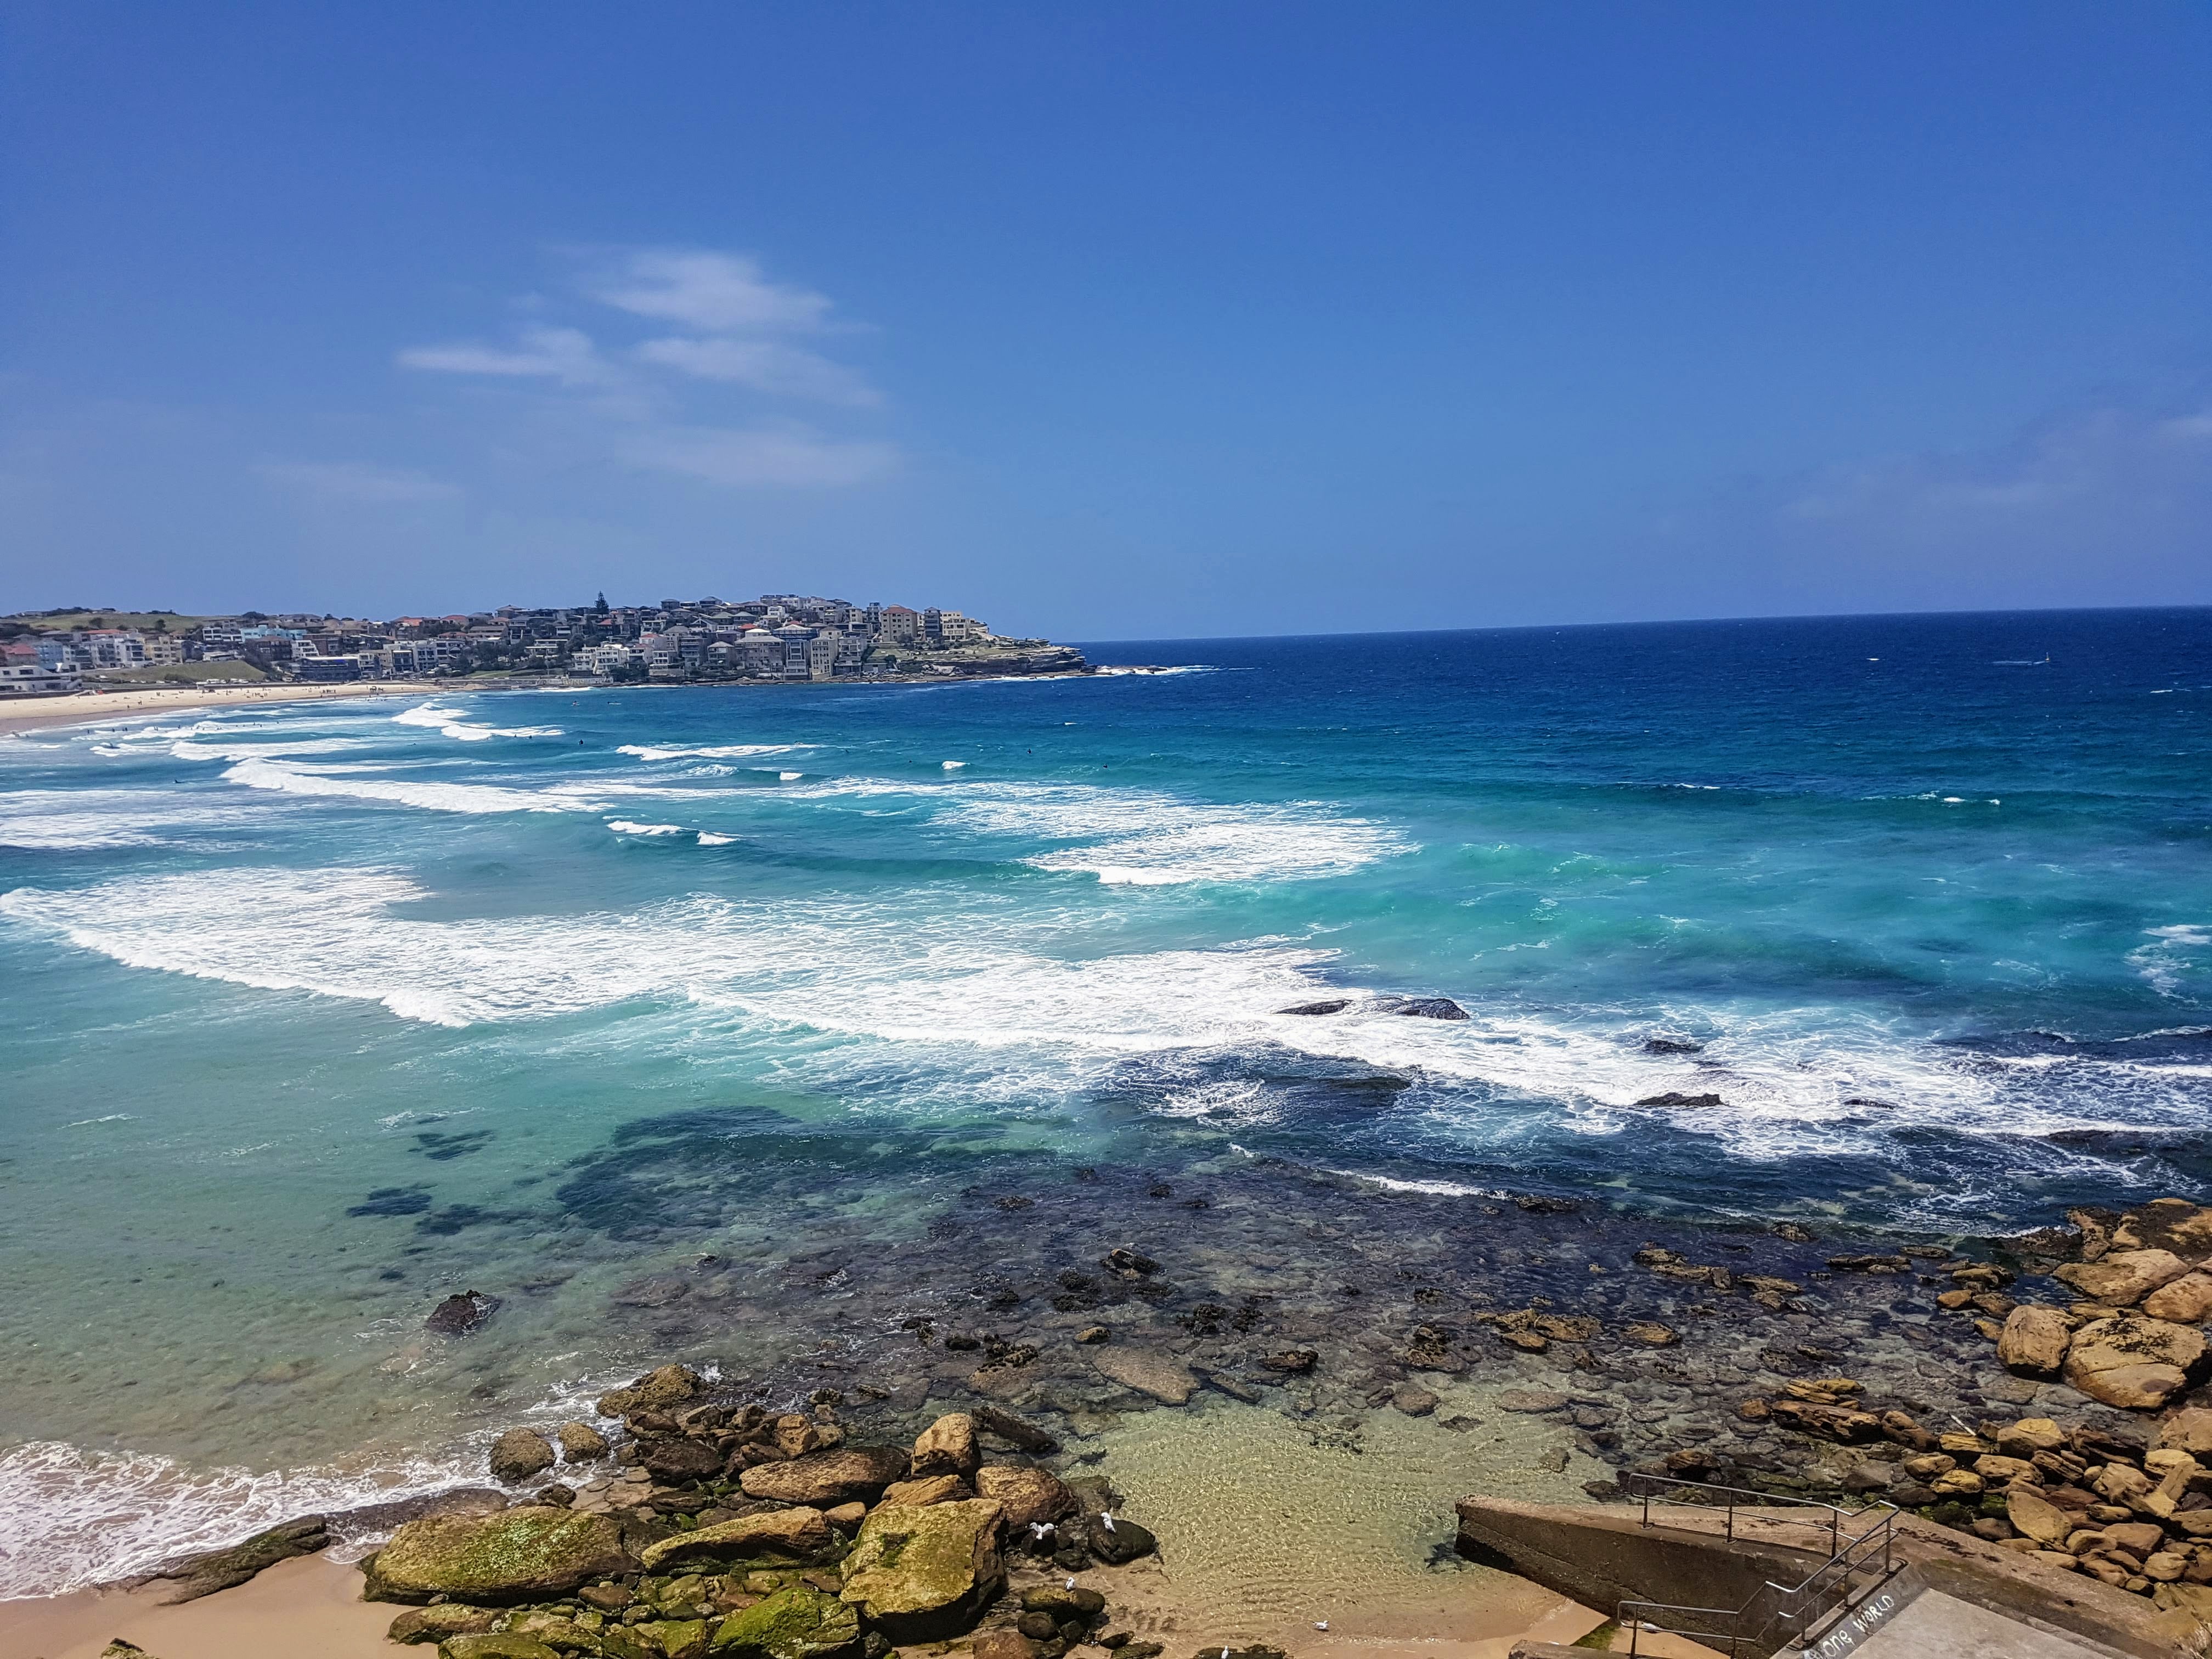 The Everyday Epiphany The Taste of Disappointment - Expectations burnt by Reality Bondi Beach